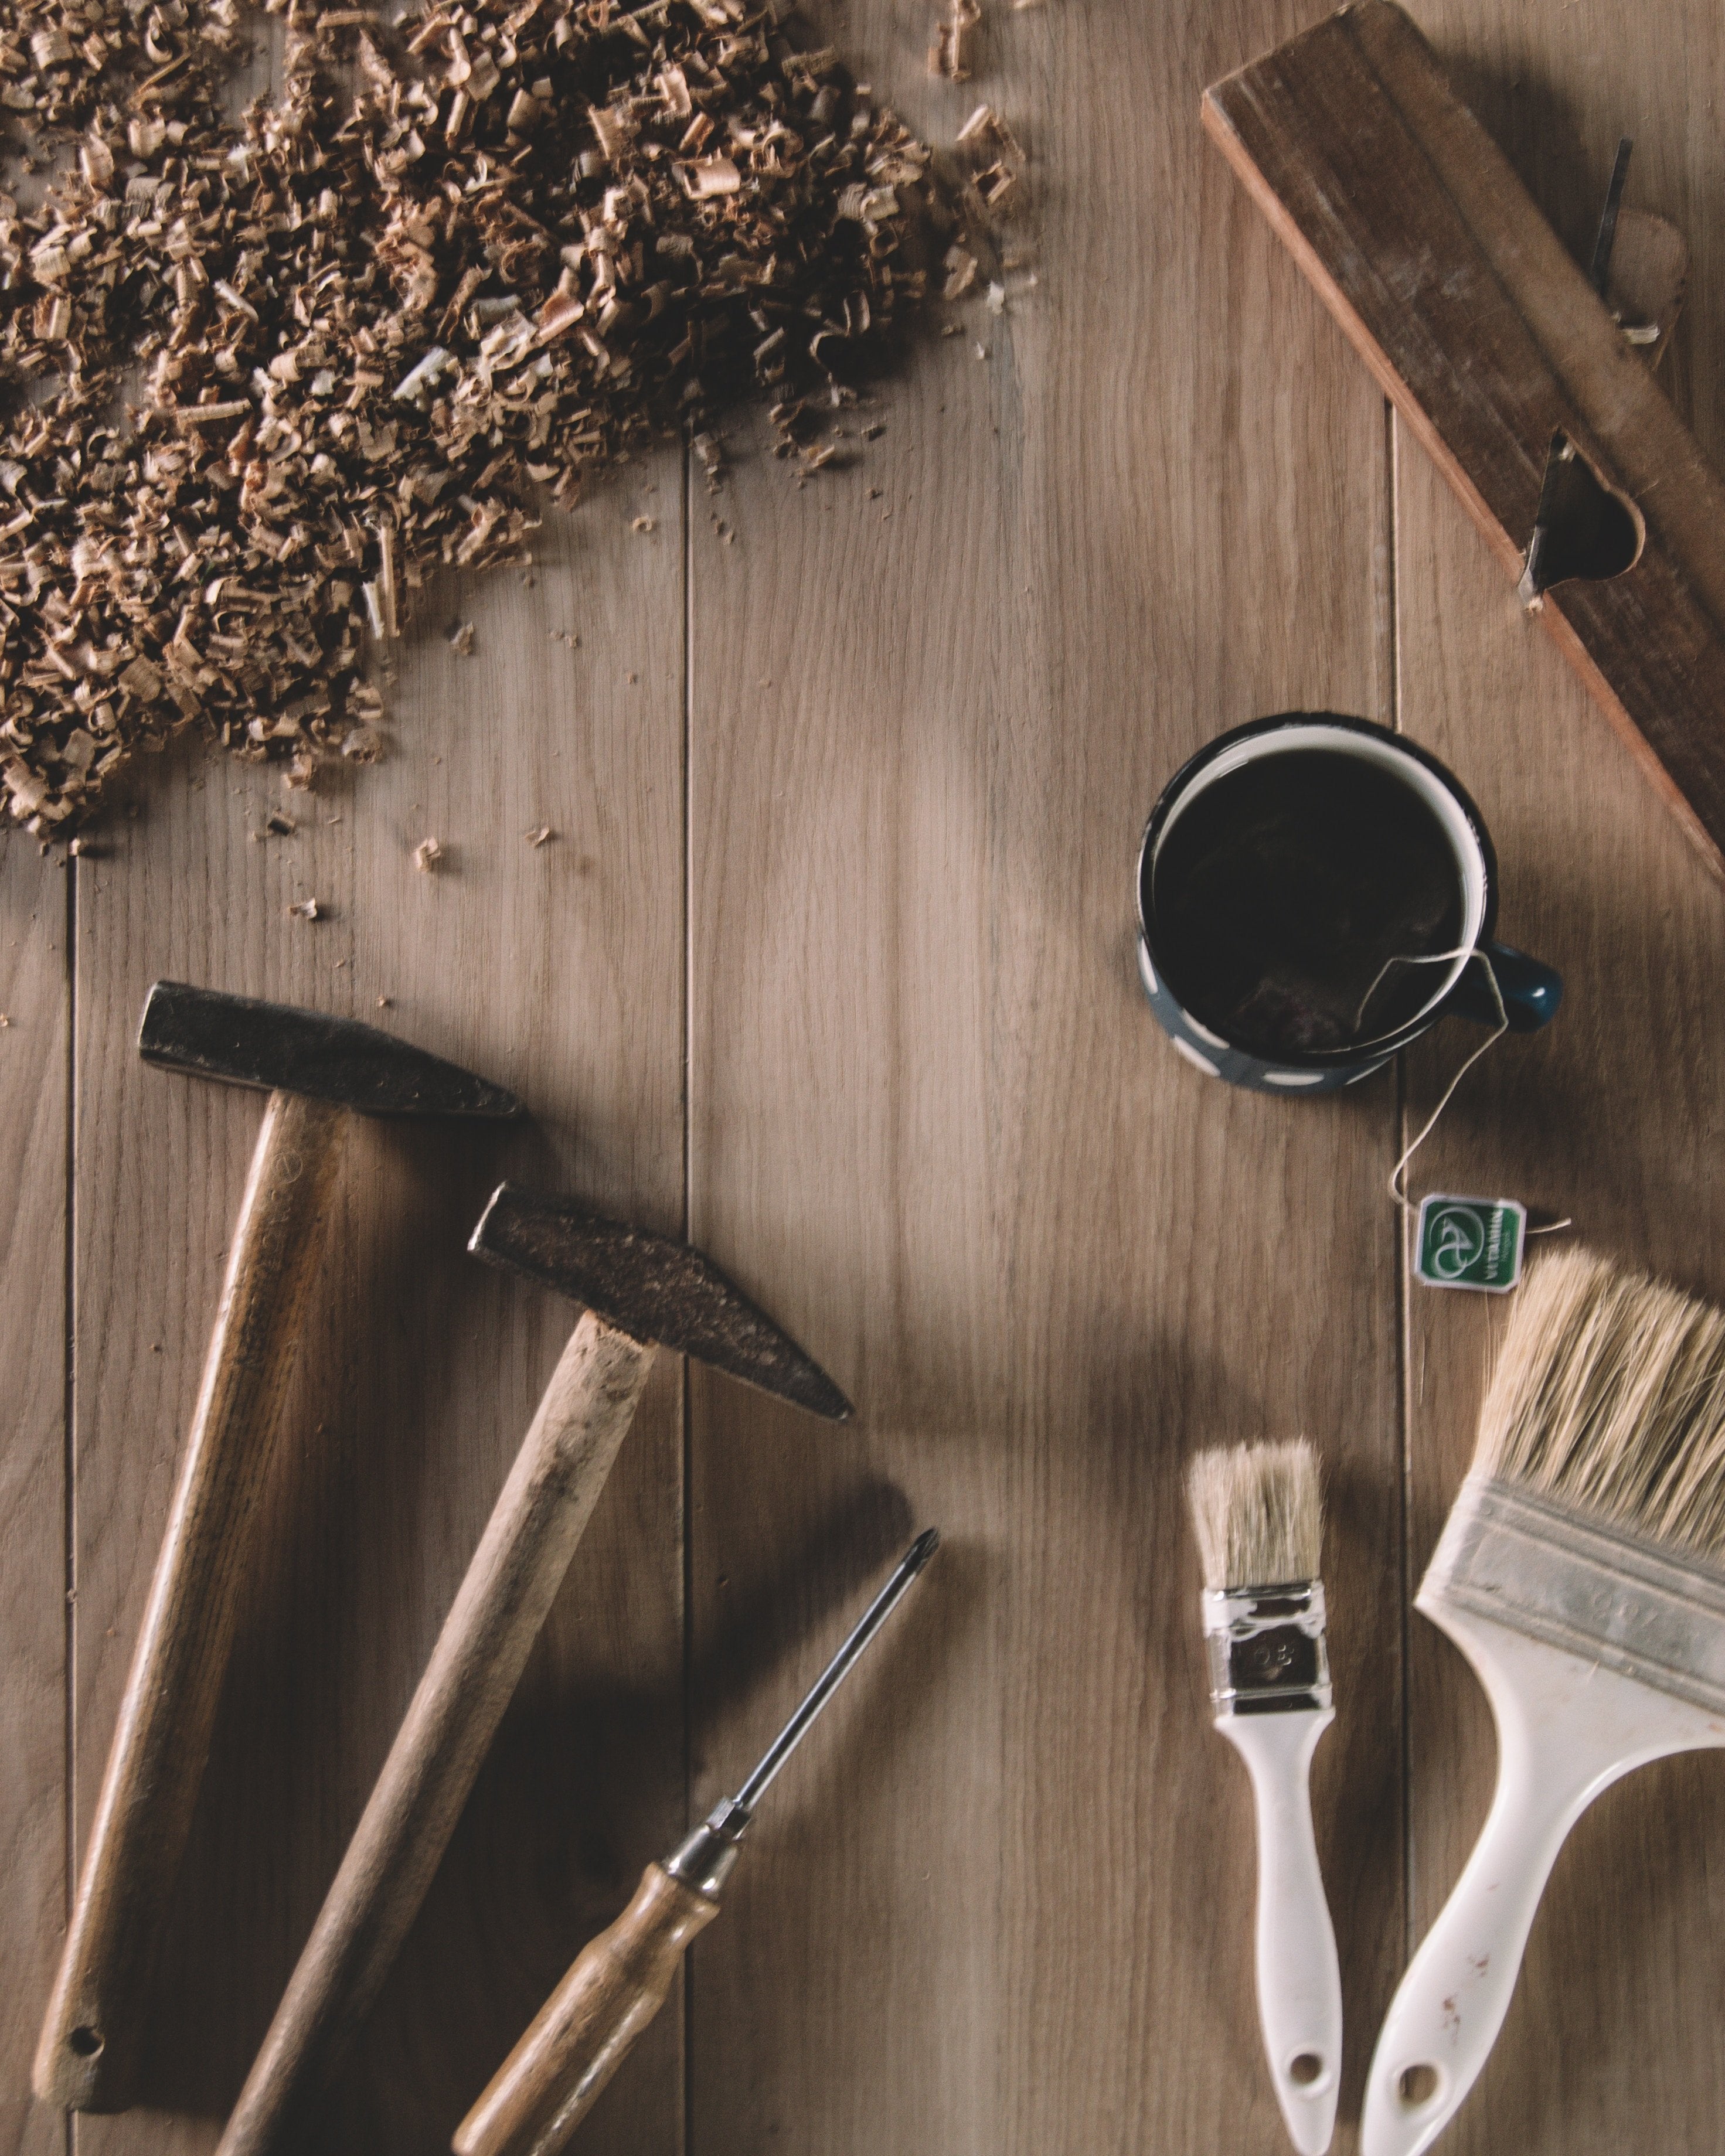 5 Ways to Become a More Efficient Woodworker